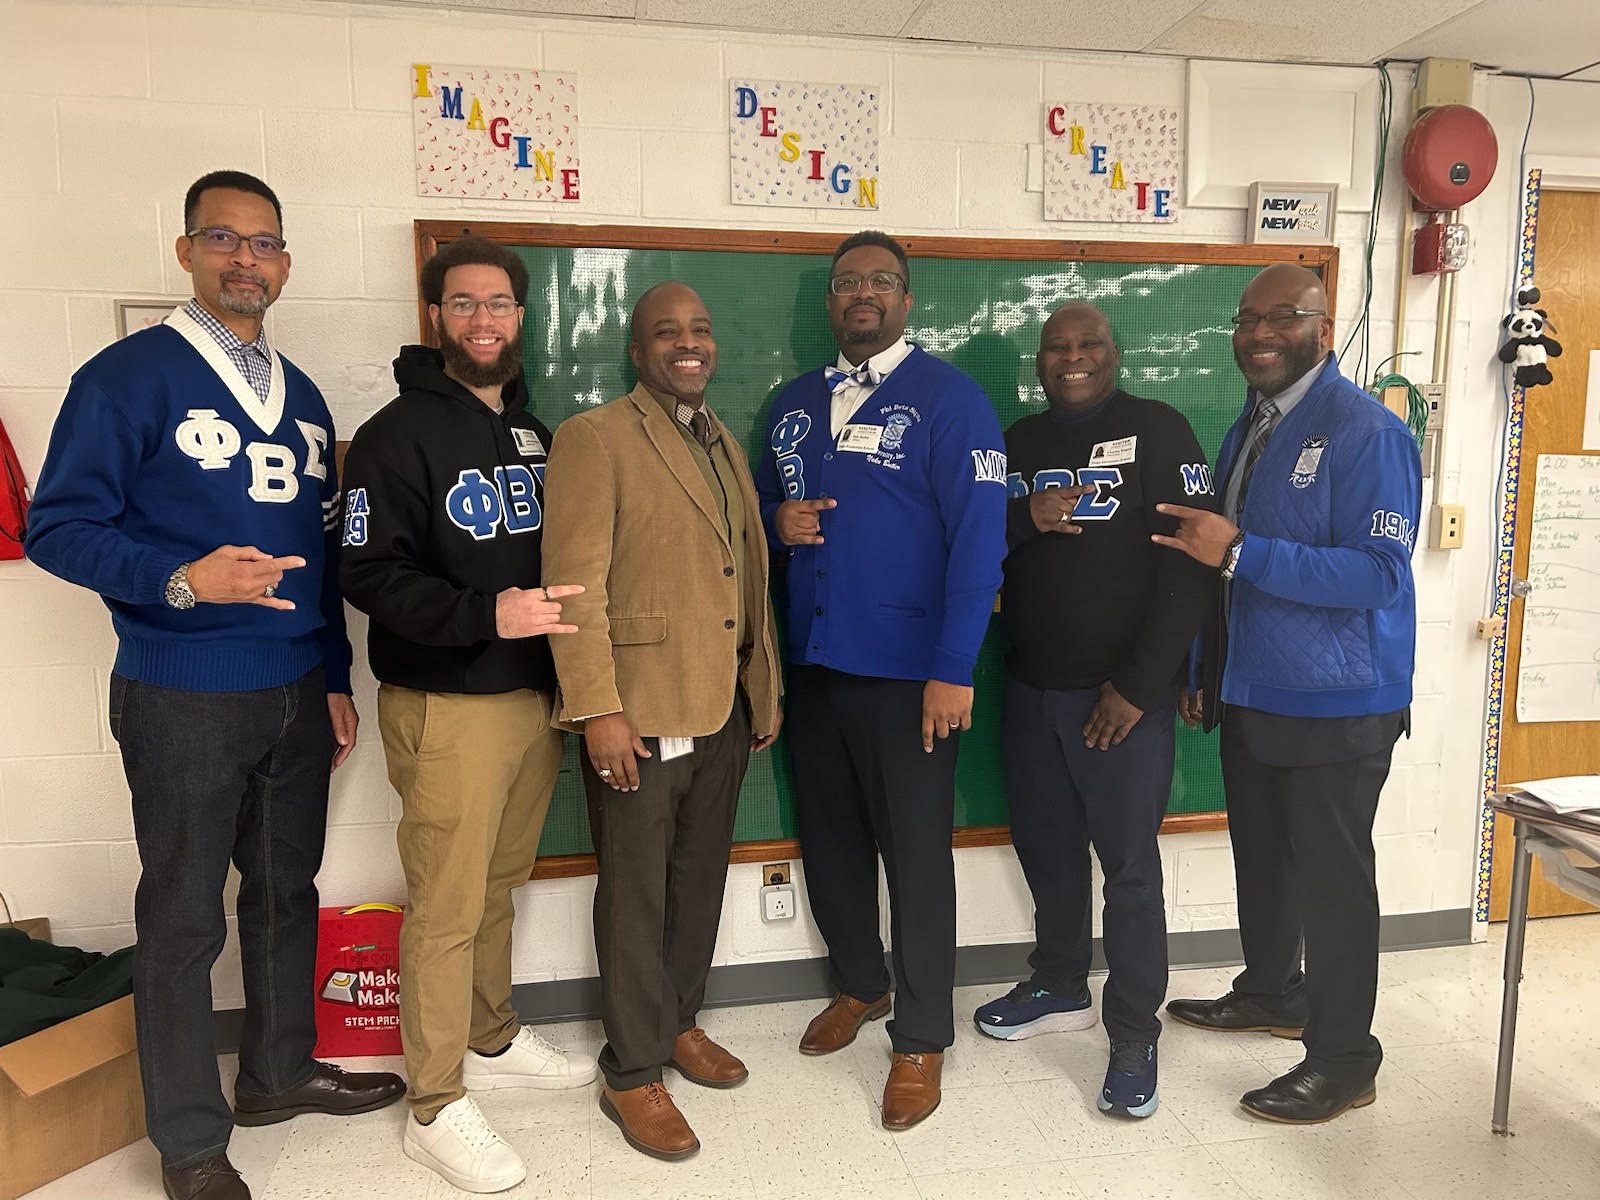 Dr. Shaun Mason and his brothers of the Phi Beta Sigma (ΦΒΣ) fraternity came to Paige talk about American agricultural scientist and inventor, George Washington Carver.